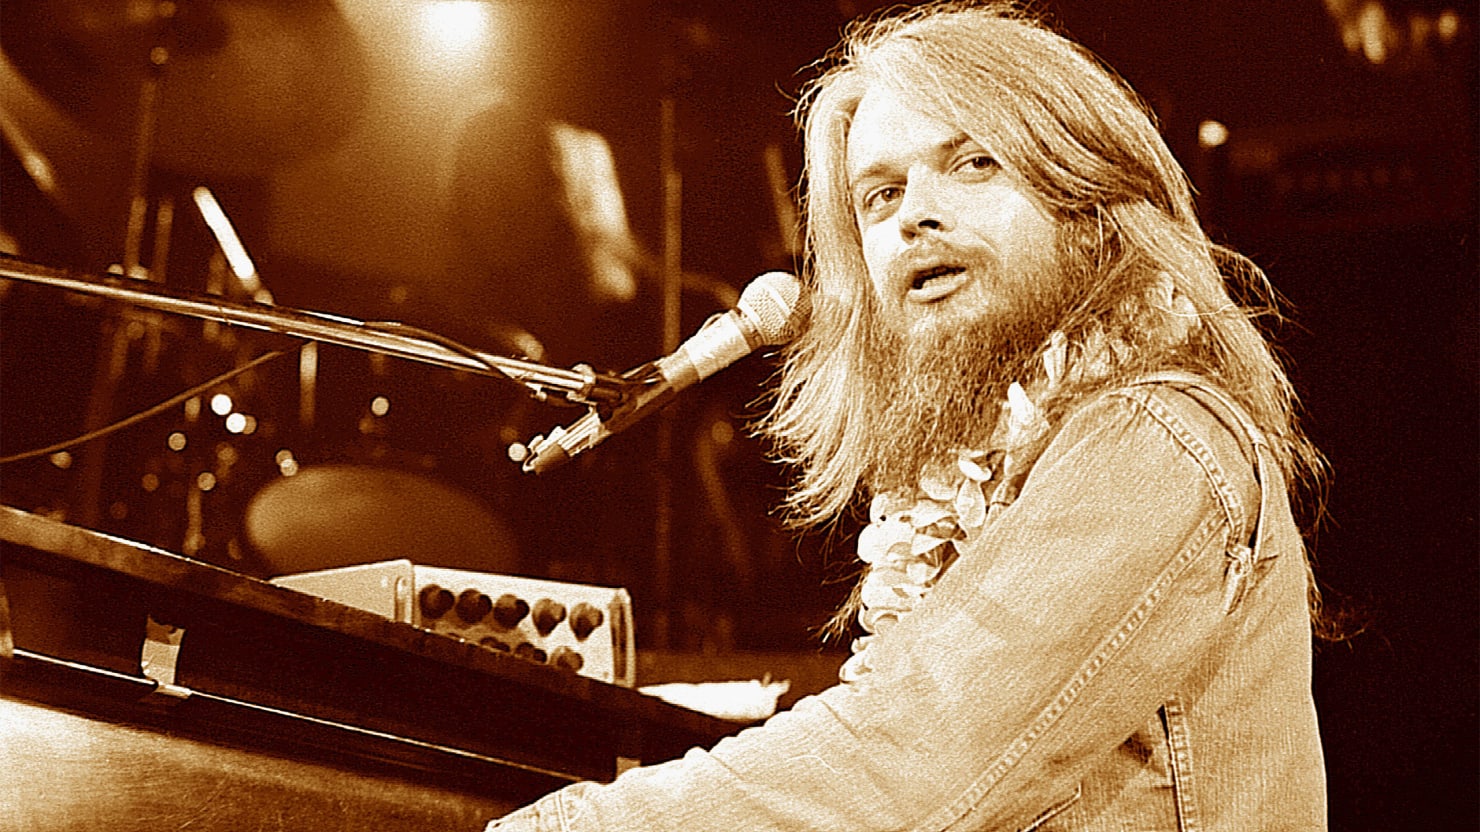 Leon Russell: The Voice Death Can’t Touch.